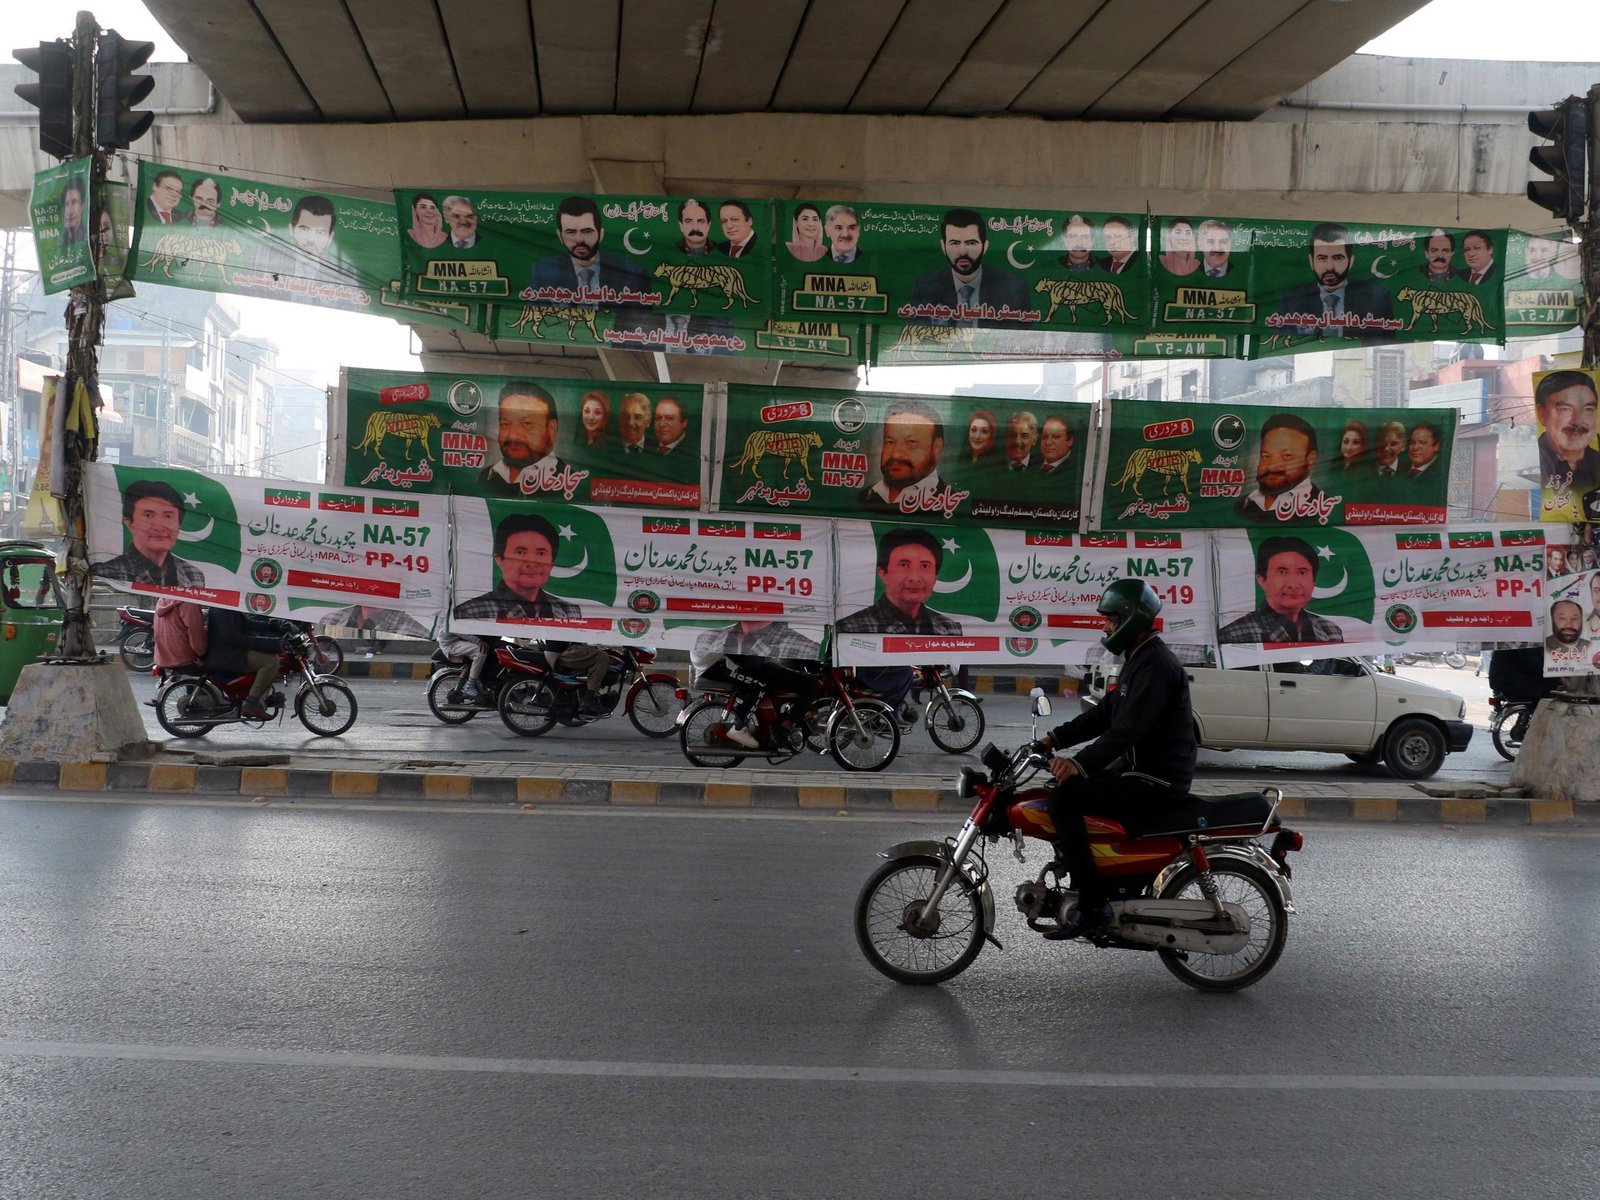 Used to be a festival Why Pakistan is seeing a subdued election campaign | Elections